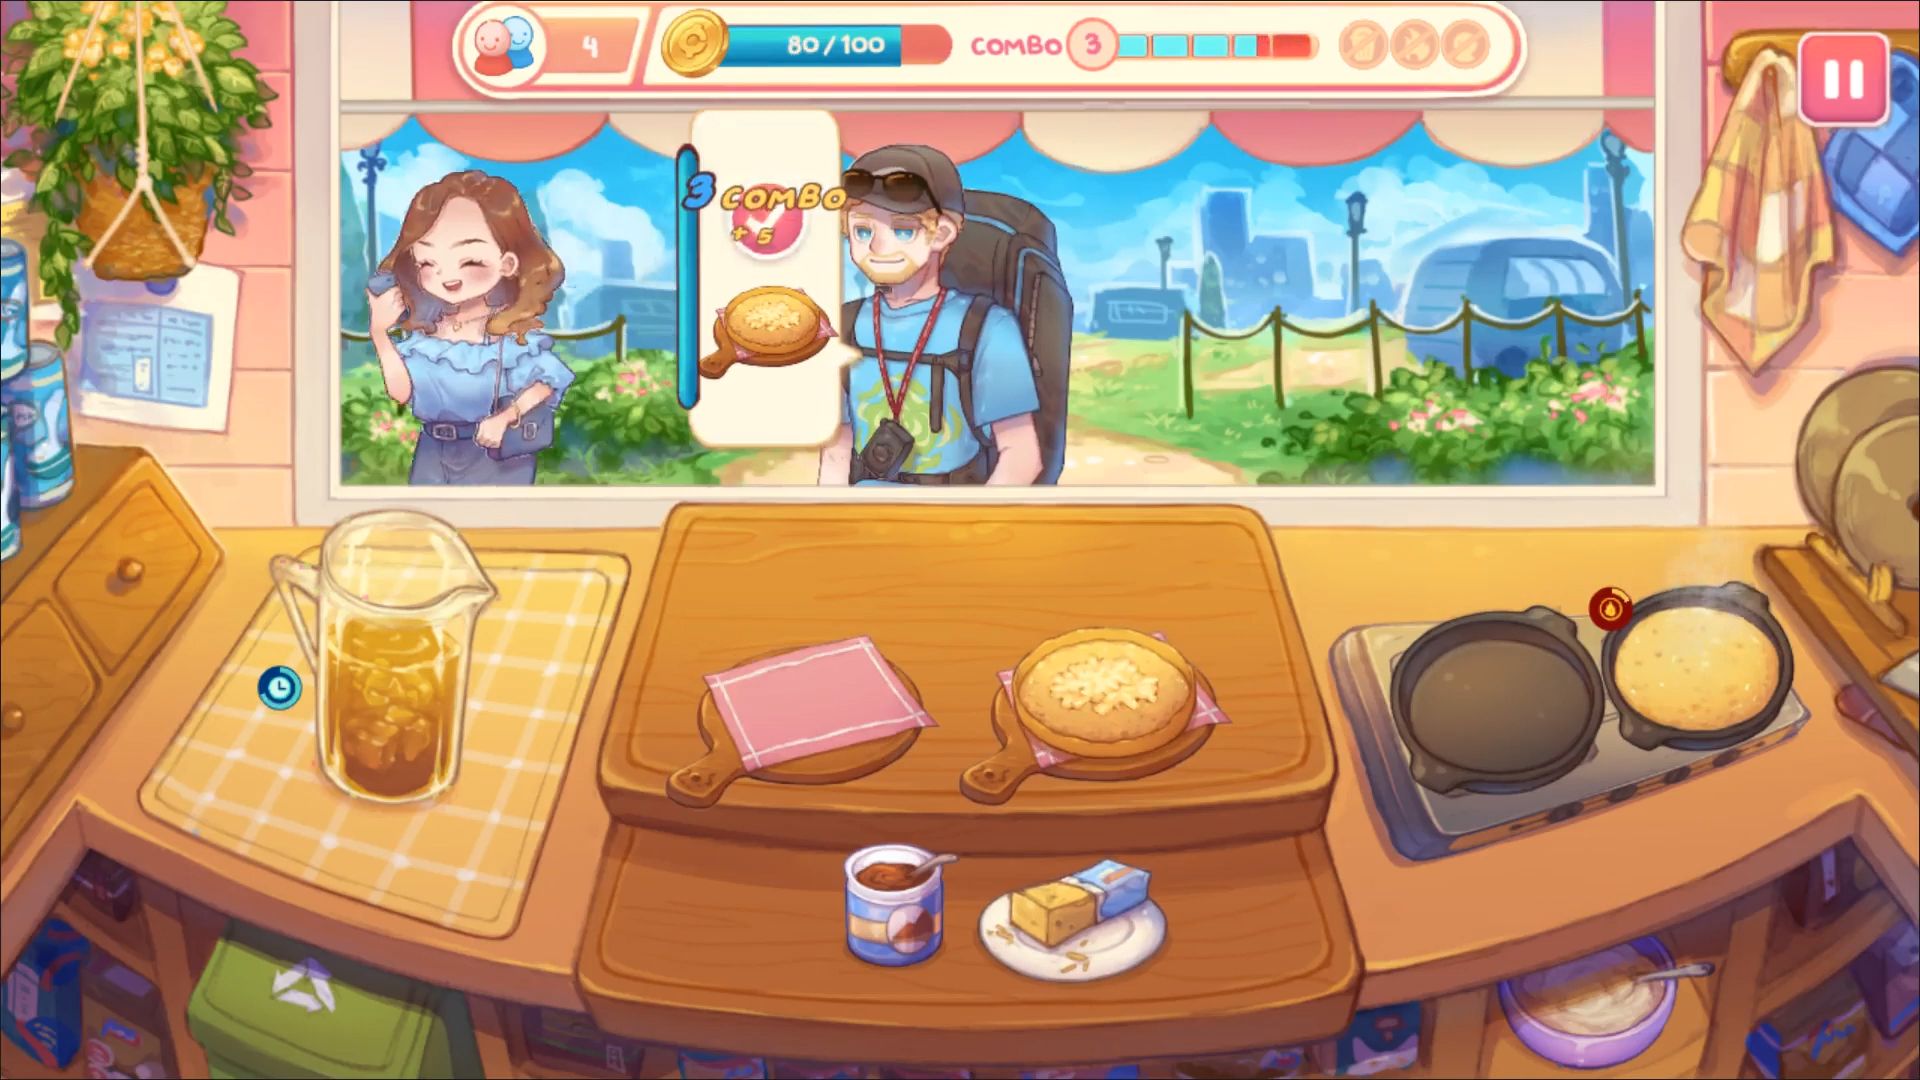 Gameplay of the Cooking Chef Story: Food Park for Android phone or tablet.